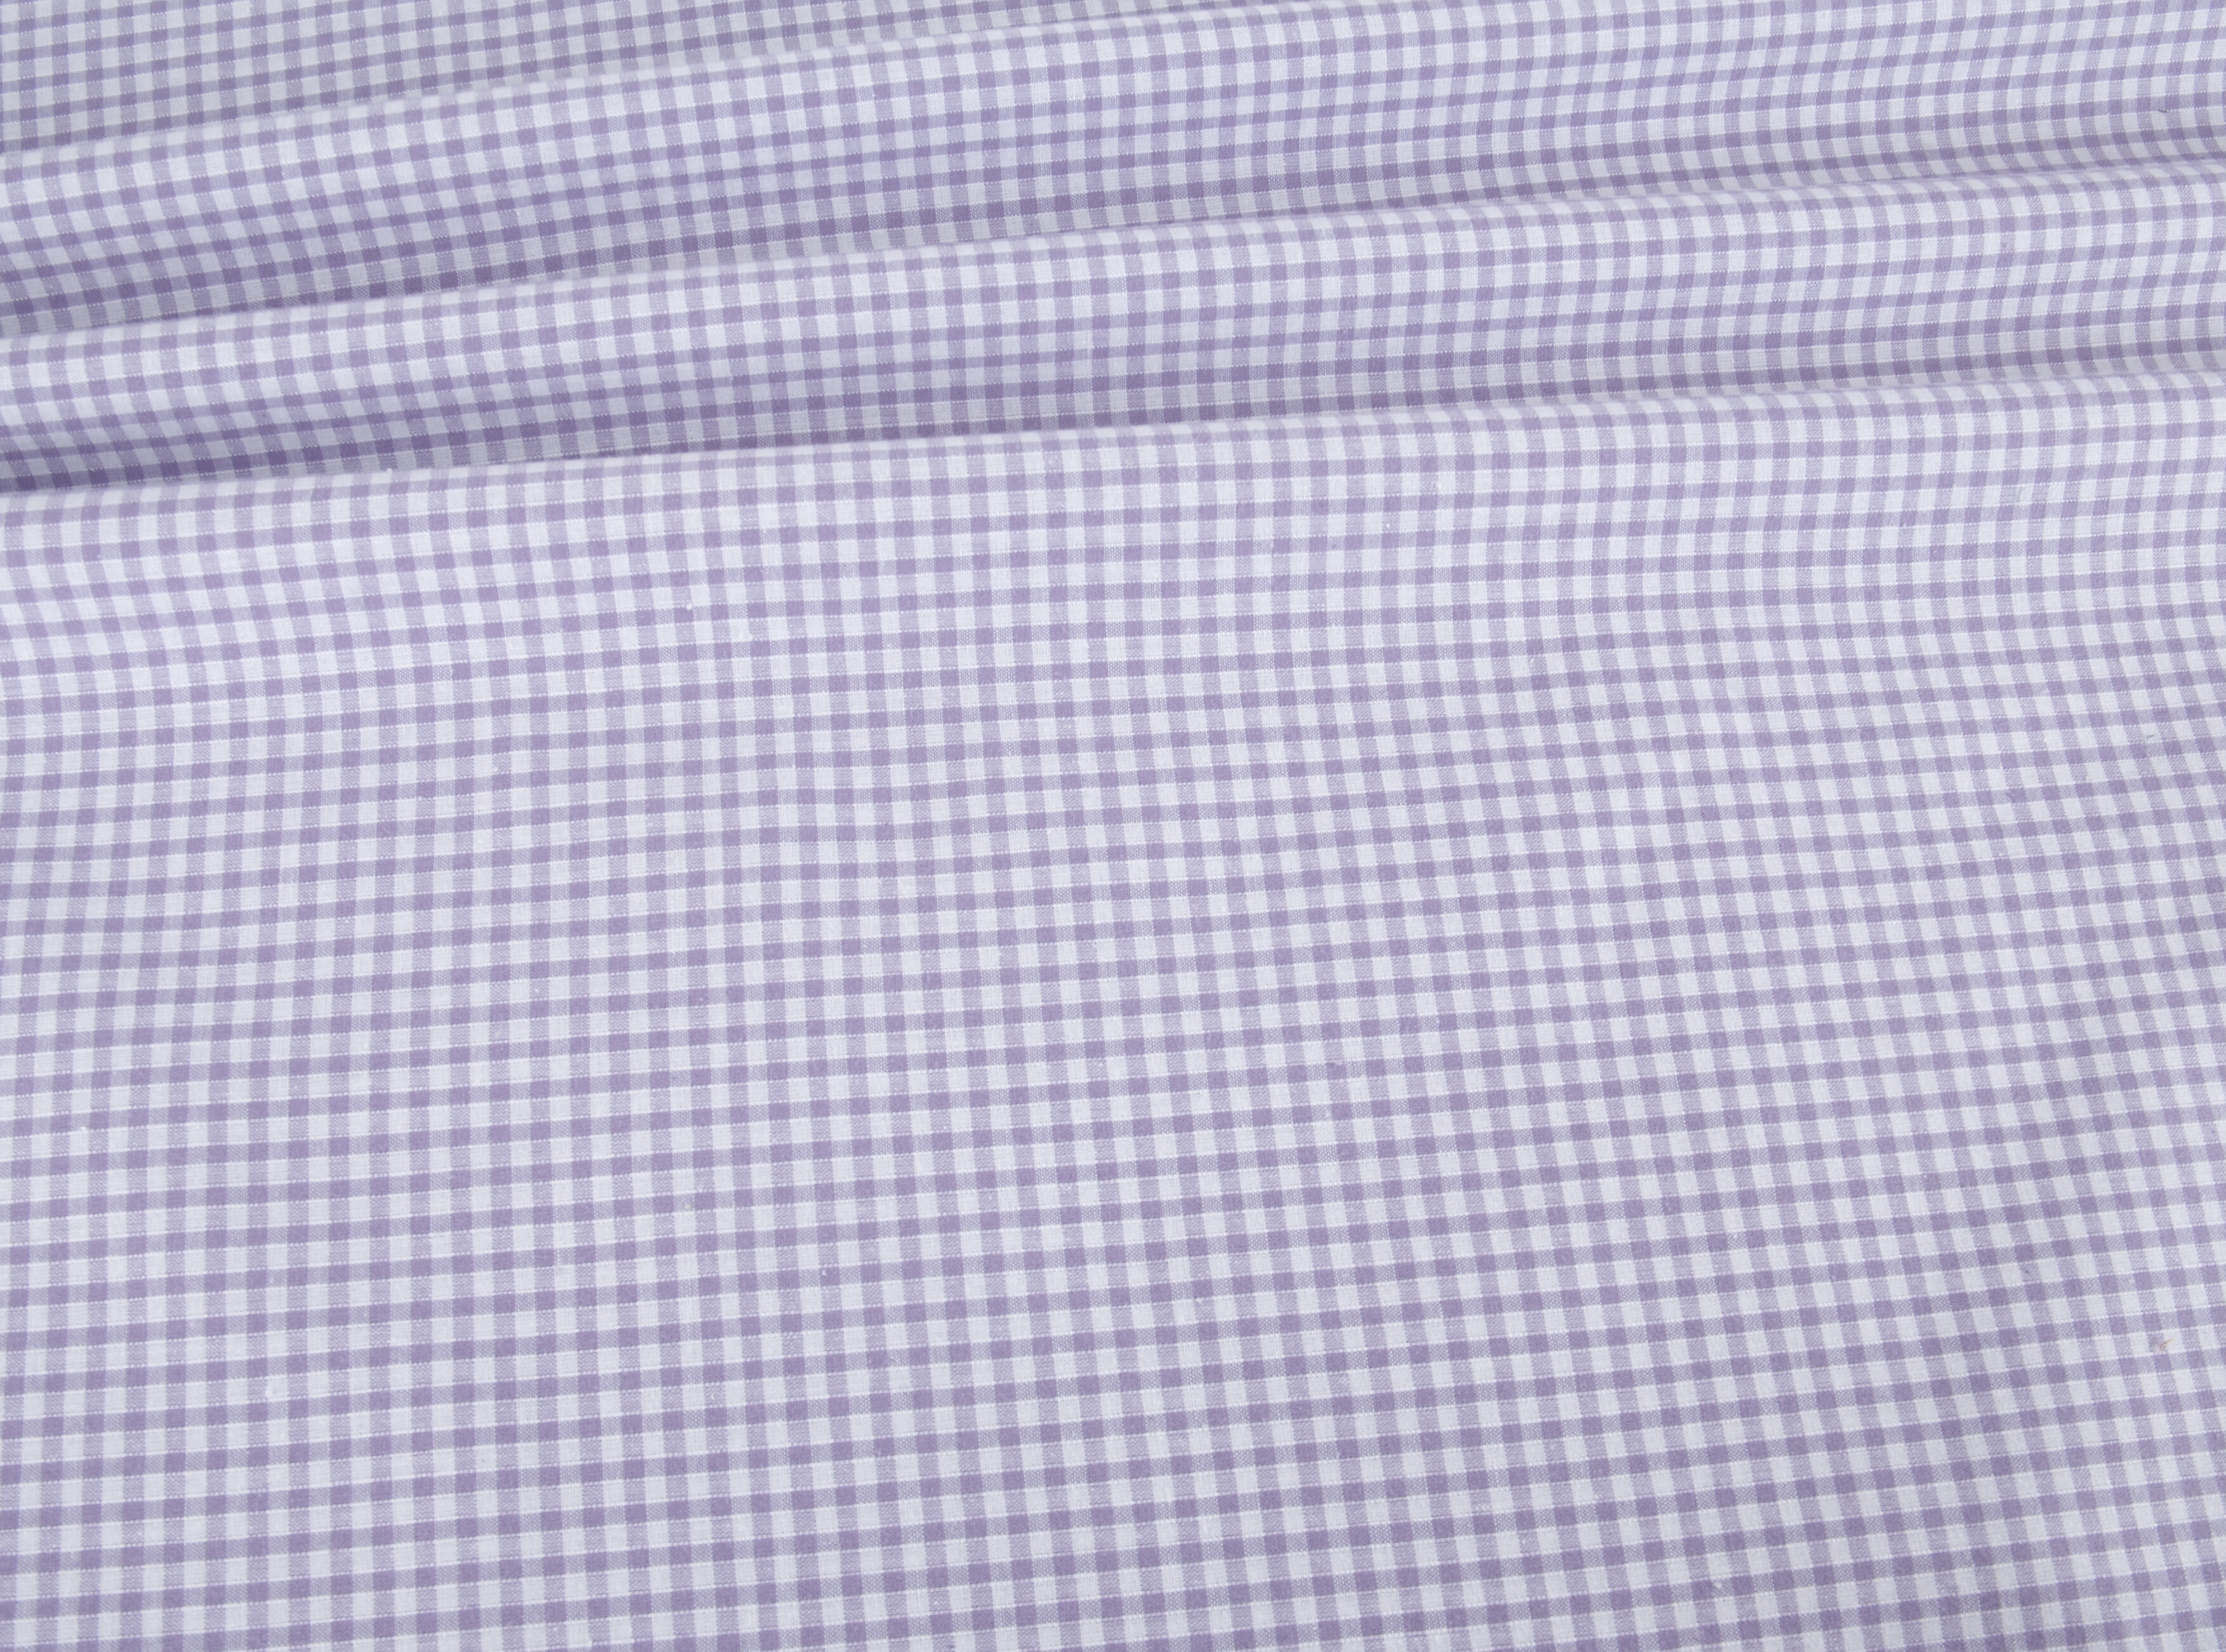 Cotton Gingham Lilac - 1/8